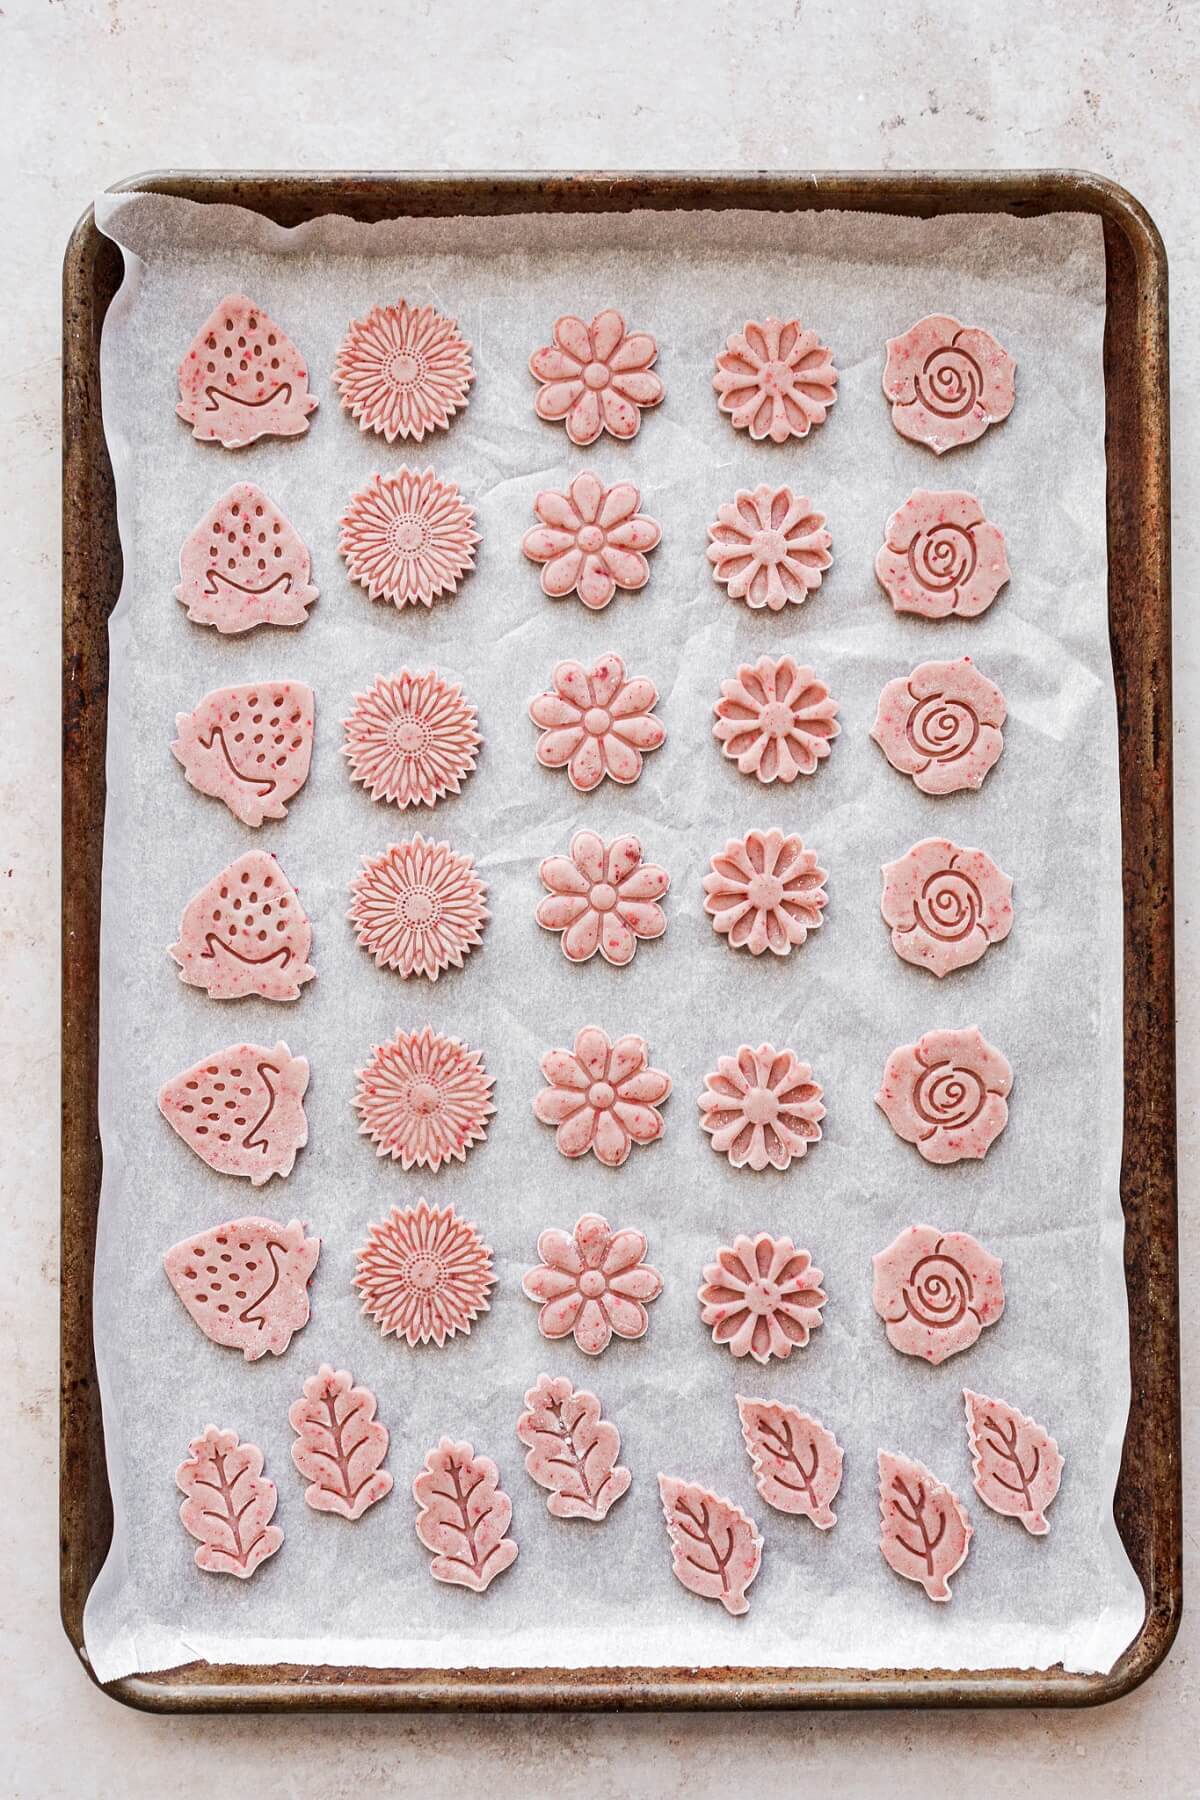 Flower shaped strawberry cutout cookies on a baking sheet.